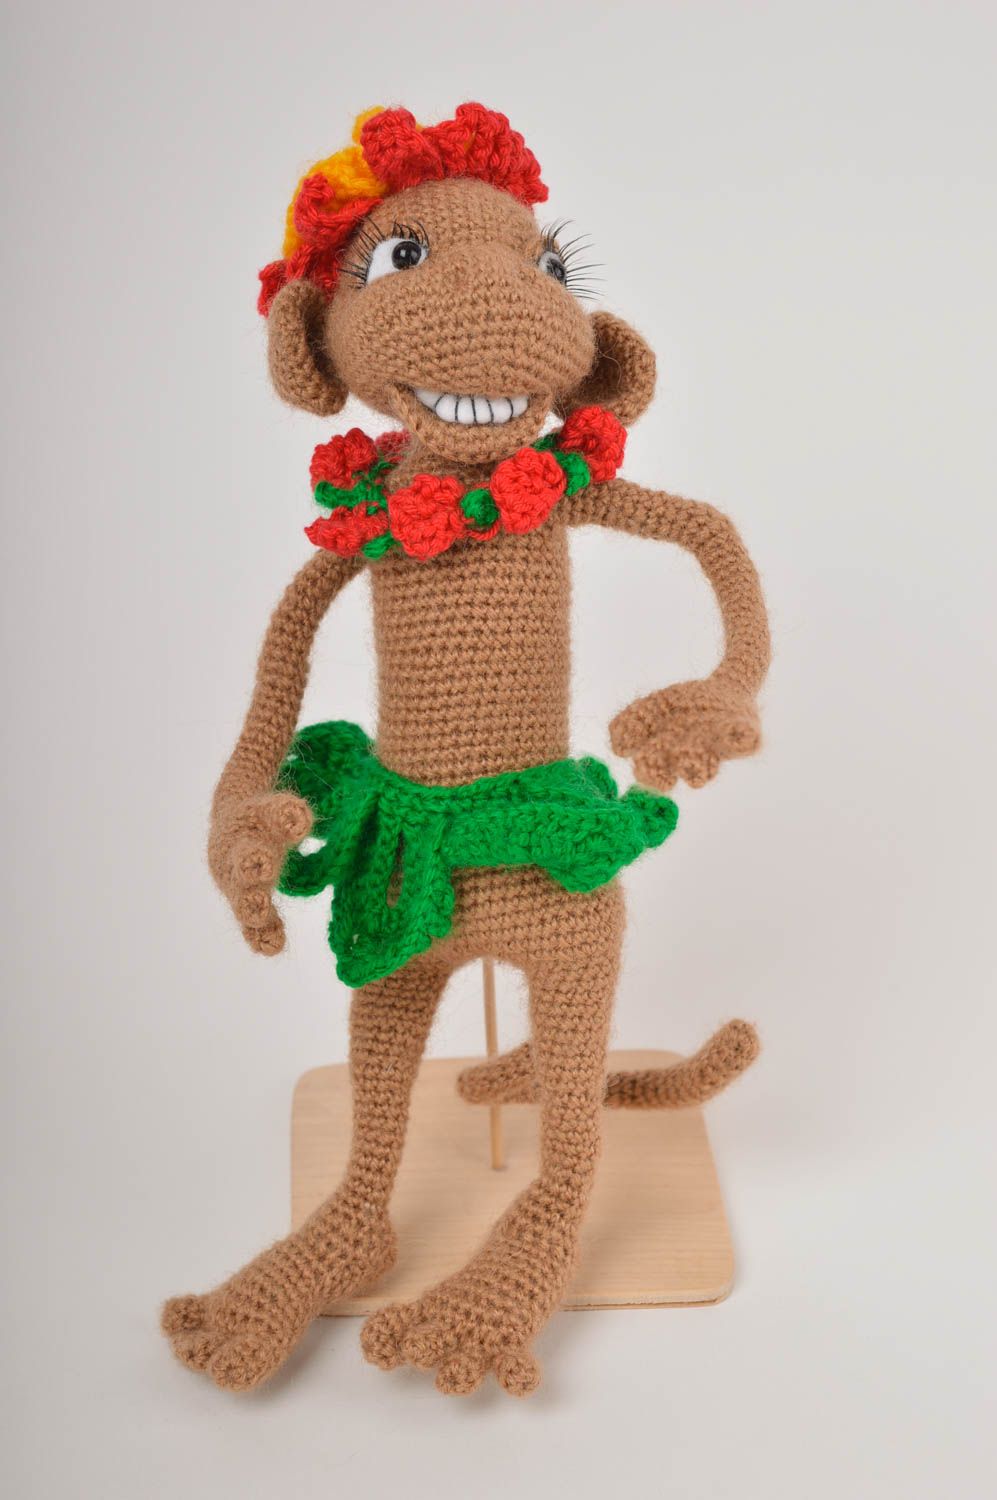 10 inches knitted stuffed monkey toy in brown, red, and green colors photo 2